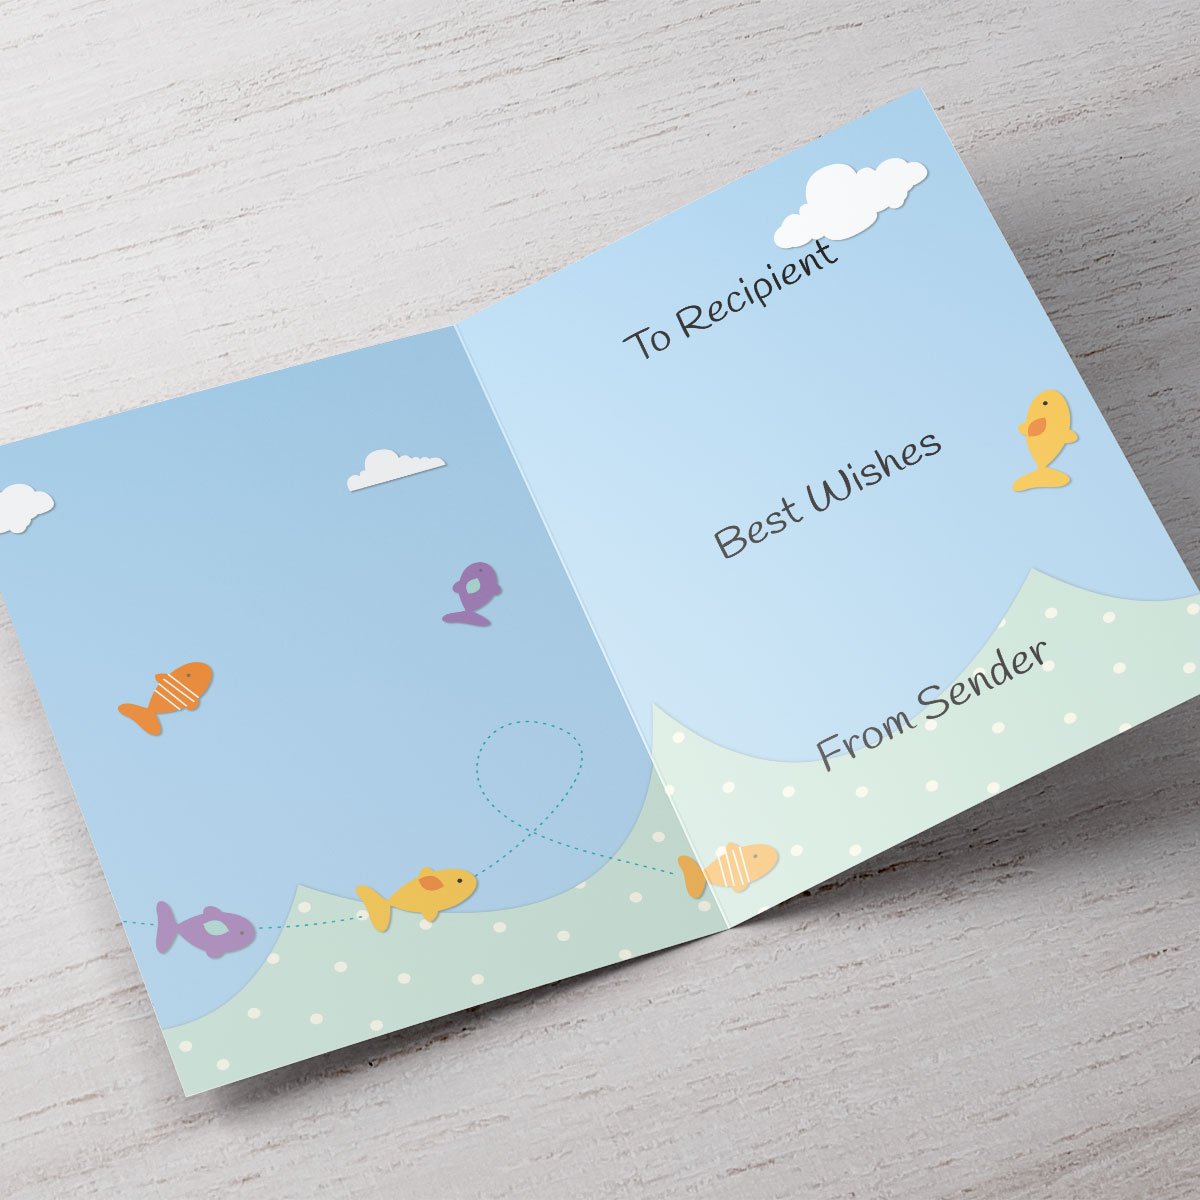 Personalised 4th Birthday Card - Fishies In The Sea